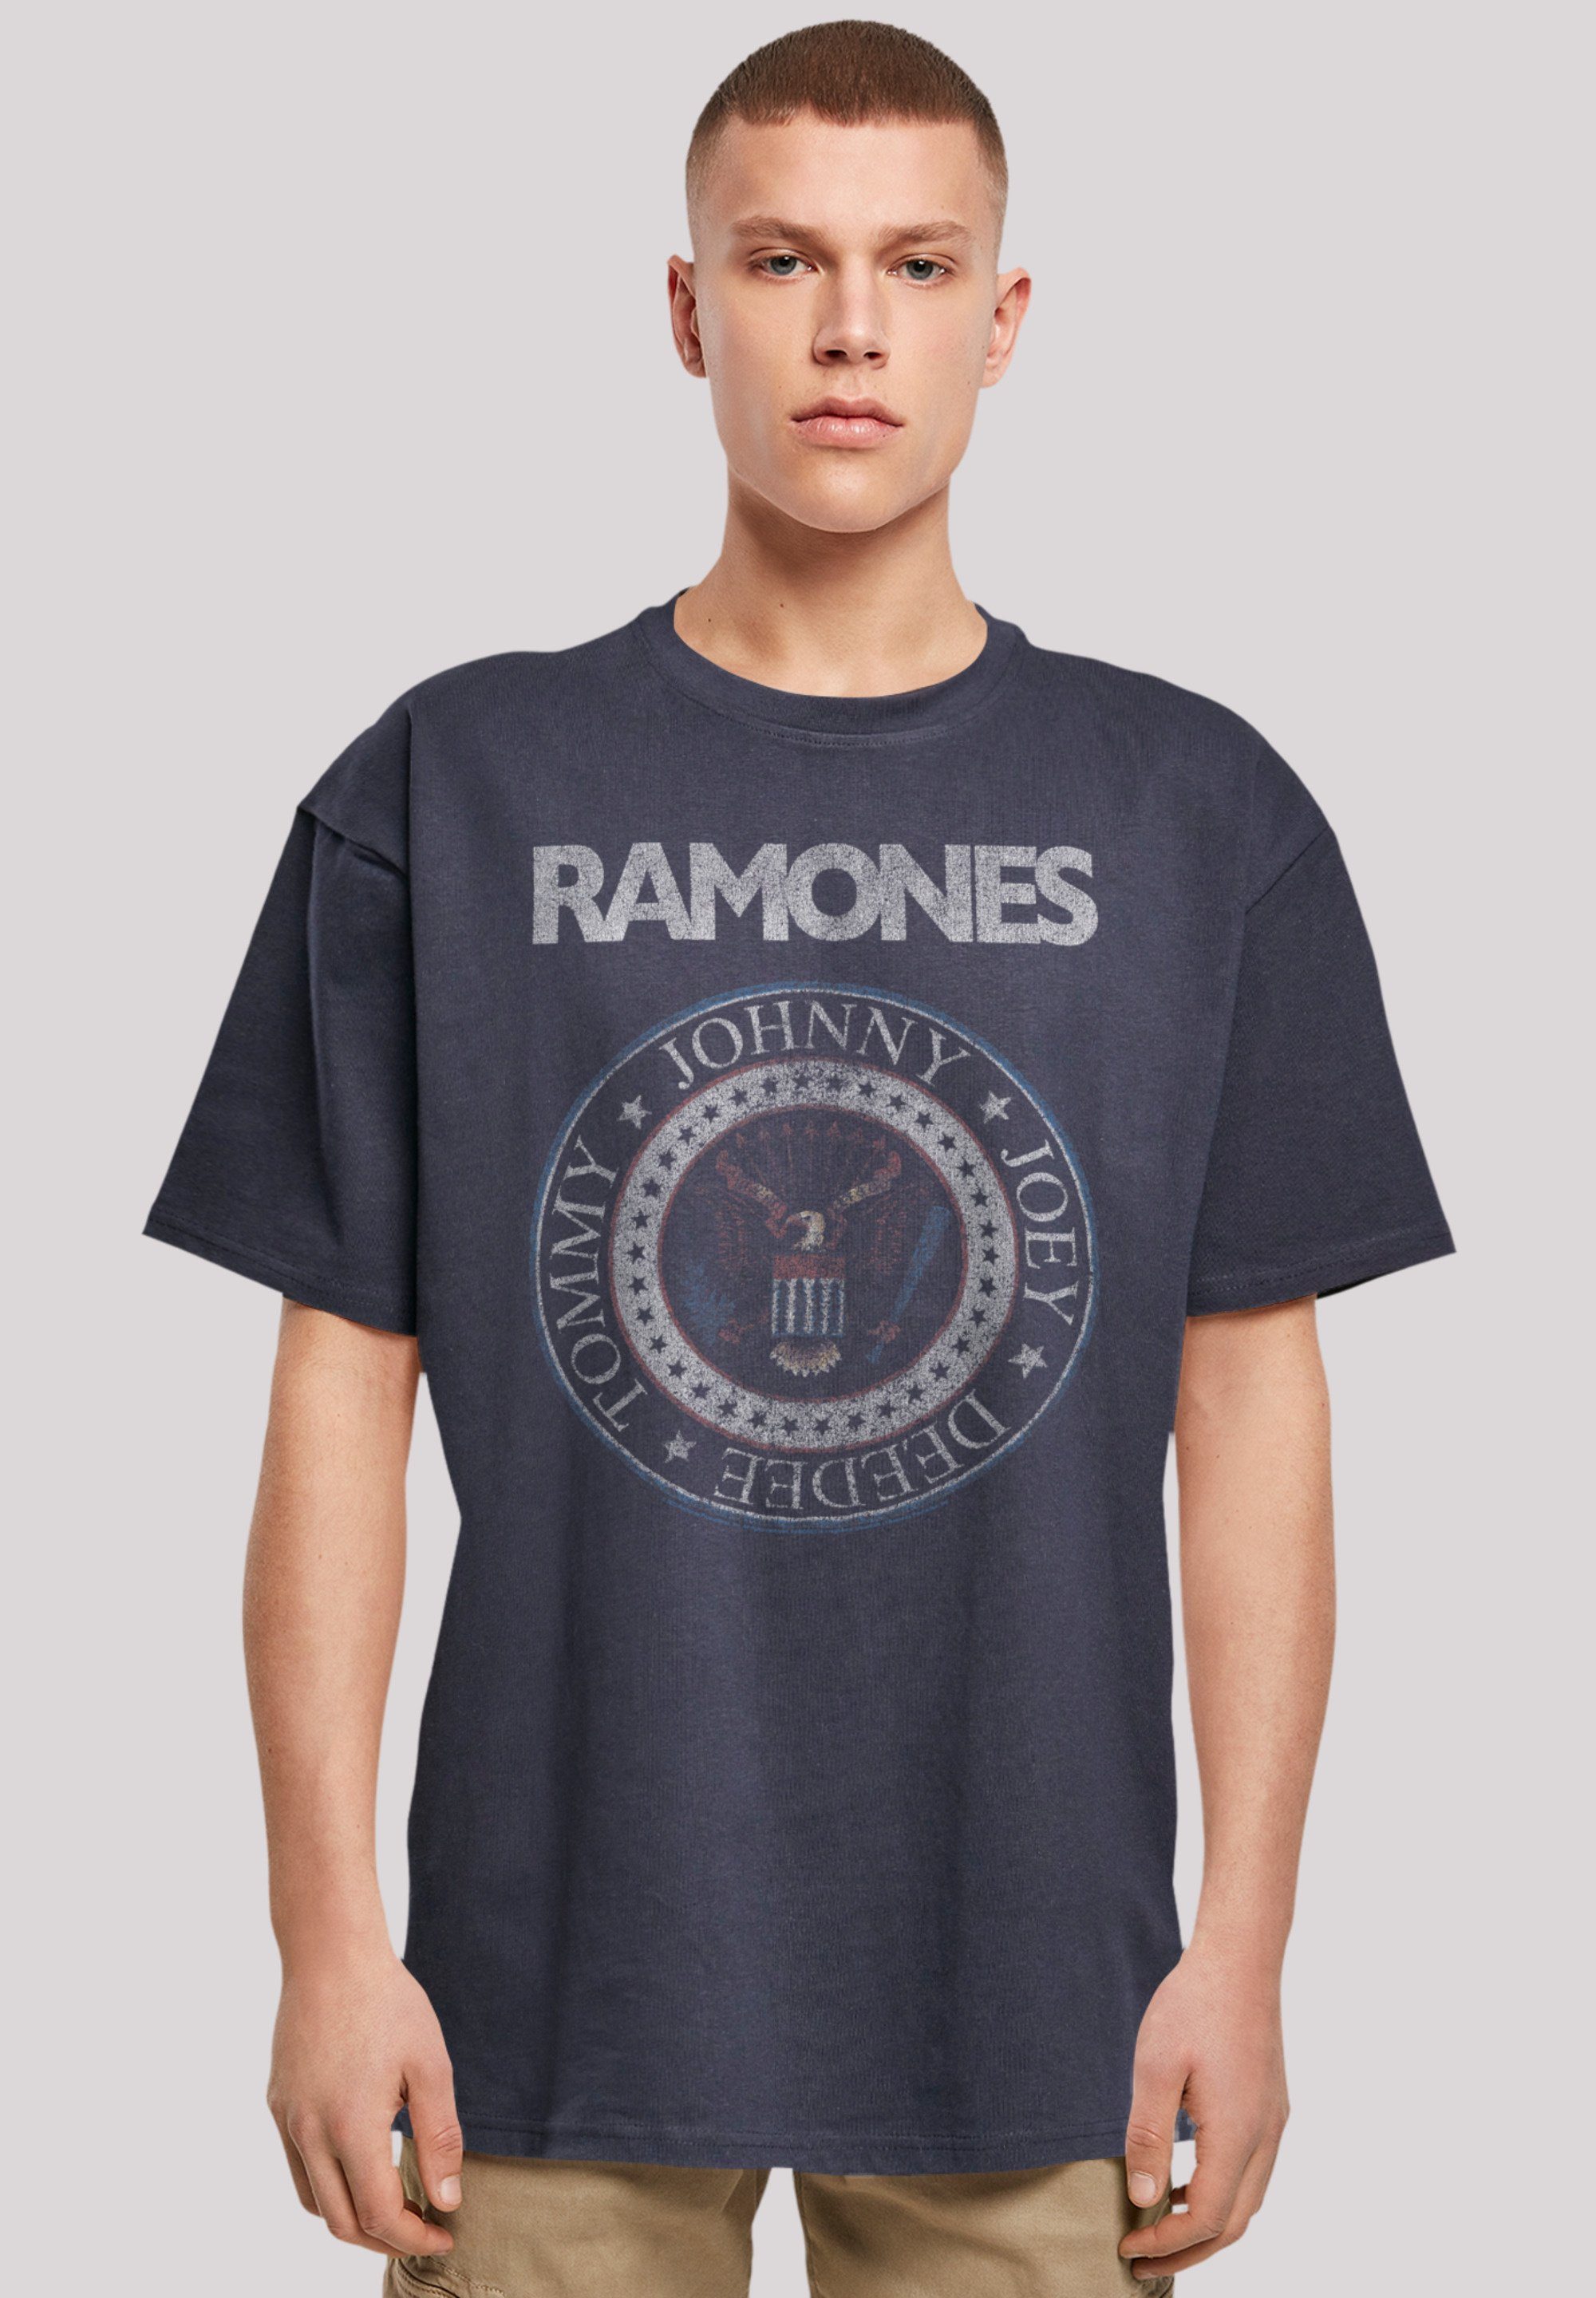 Musik navy F4NT4STIC Qualität, Ramones And White Red Rock Seal Premium Rock-Musik Band T-Shirt Band,